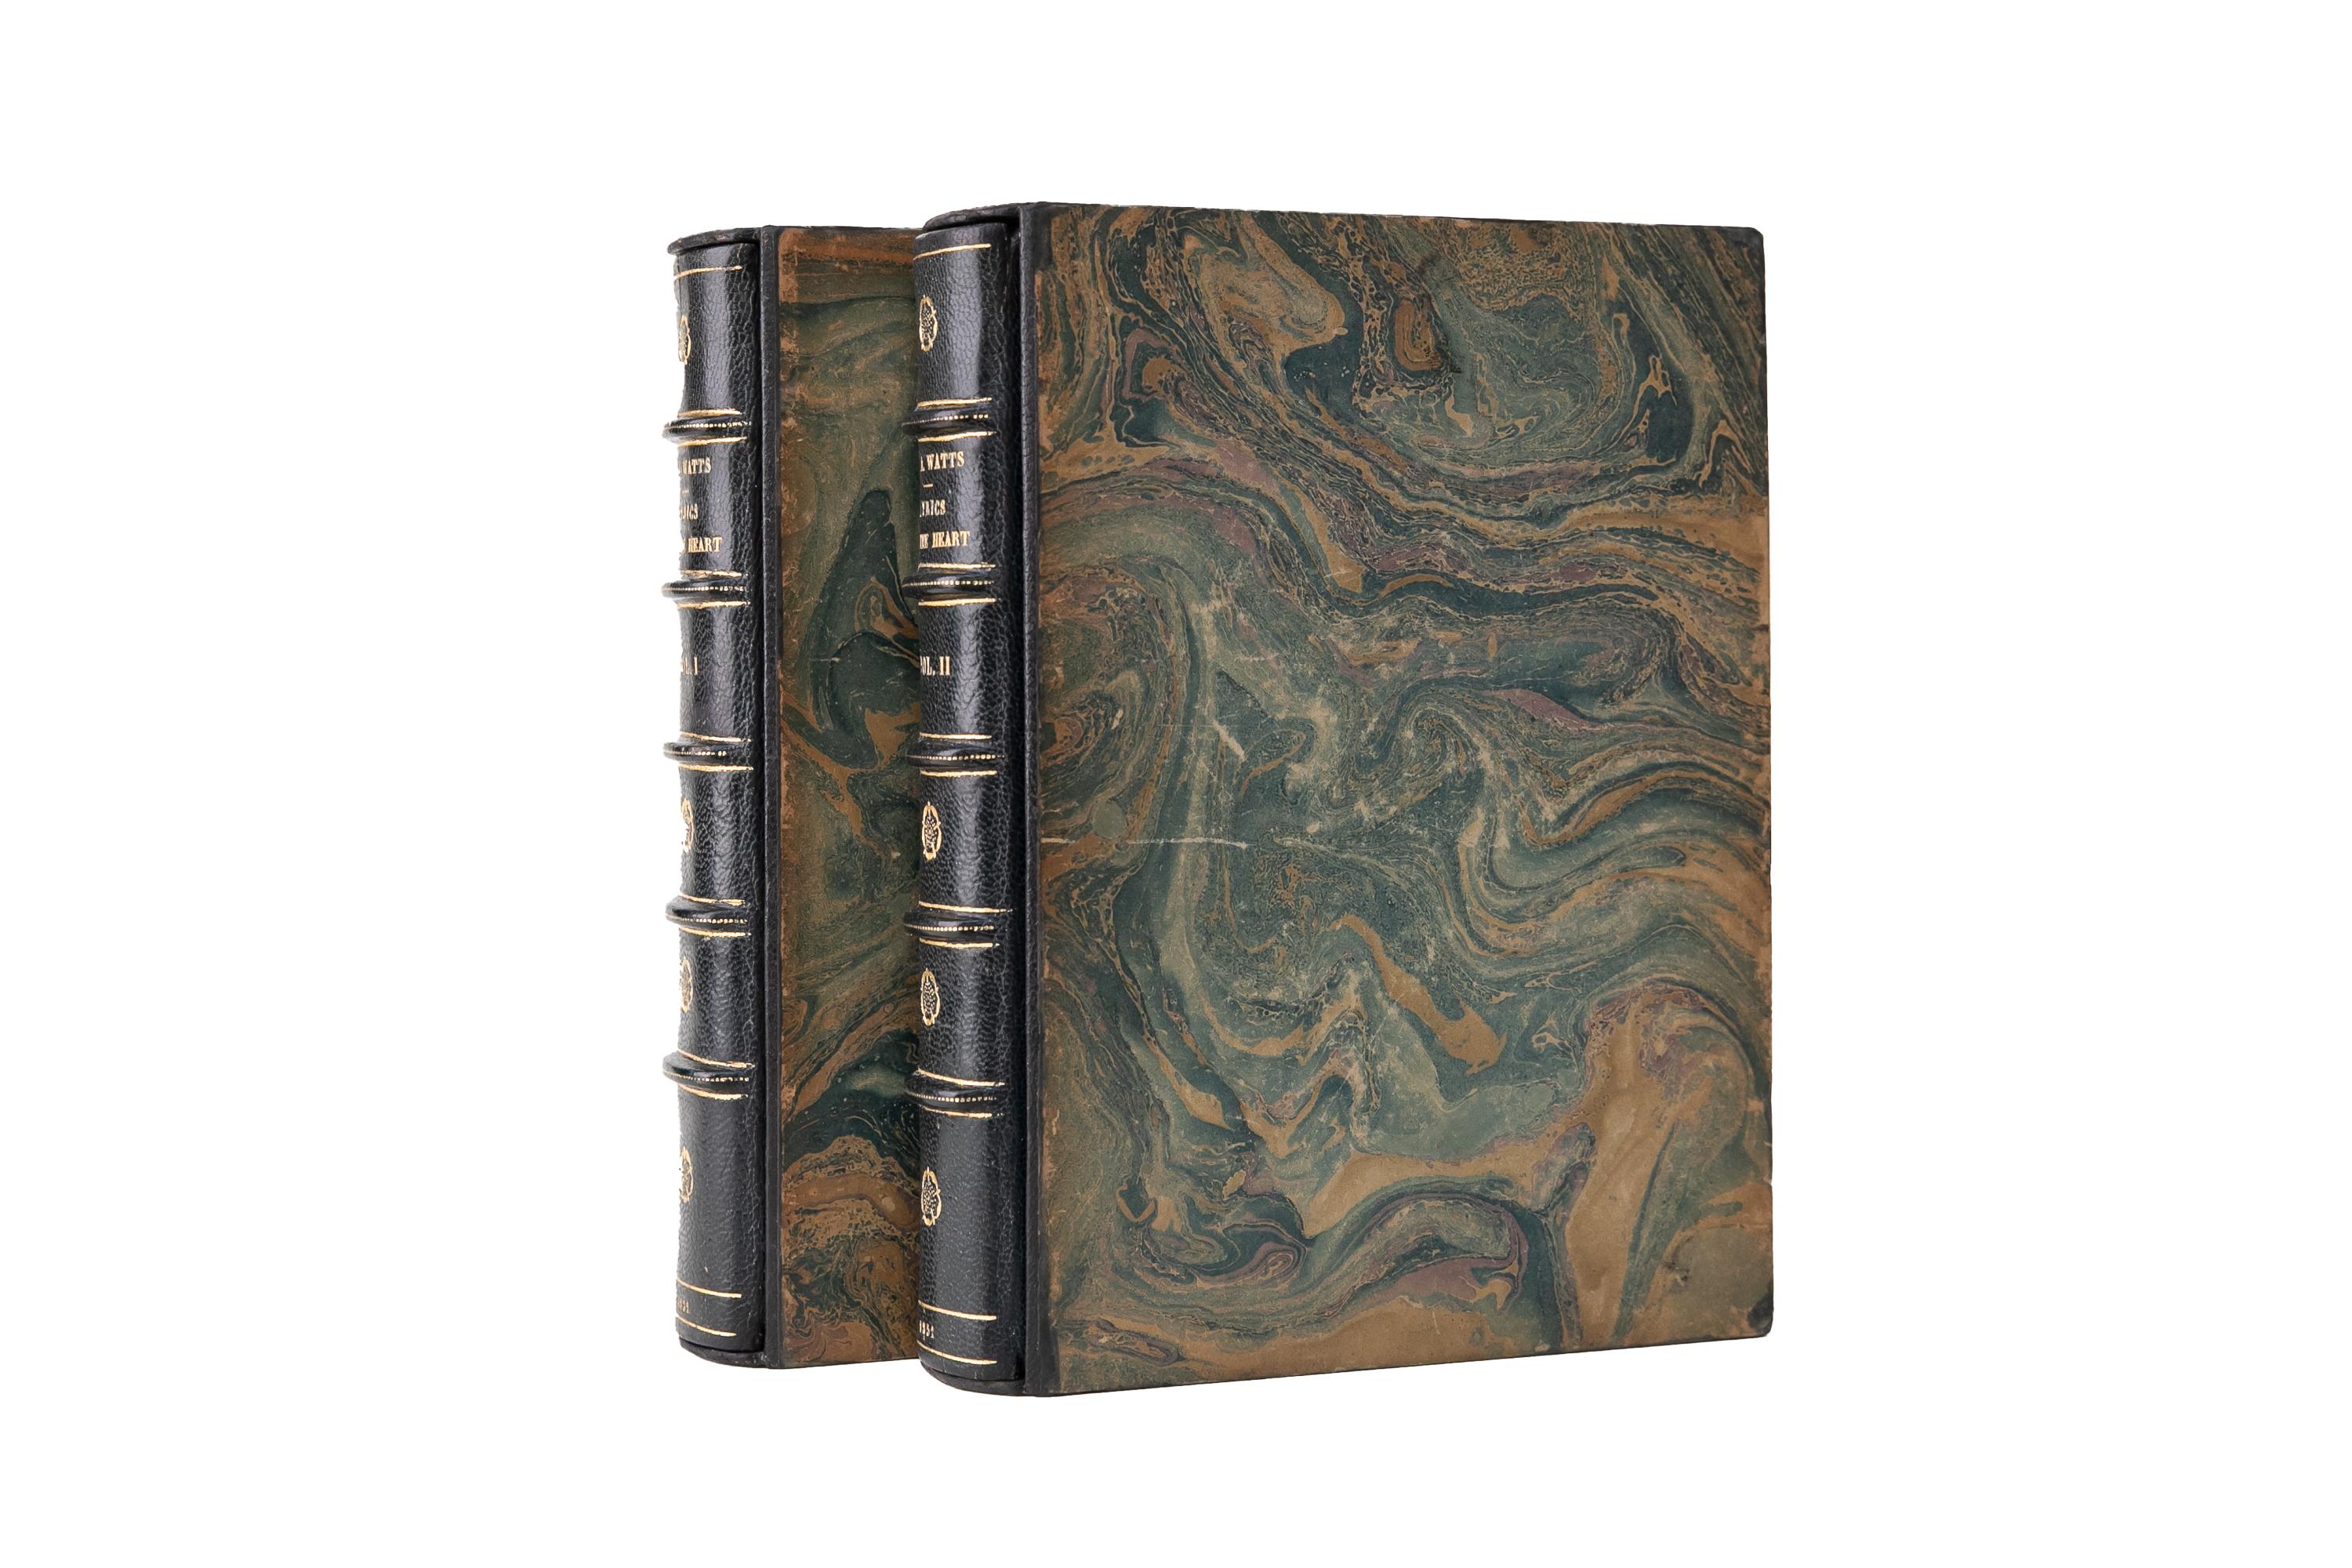 2 Volumes, Alaric A. Watts, Lyrics of the Heart and Other Poems. Limited Edition. Bound in full blue morocco with the raised band spines displaying gilt-tooling. Top edges gilt. Brown morocco doublures with pink inlay flowers and gilt-tooled